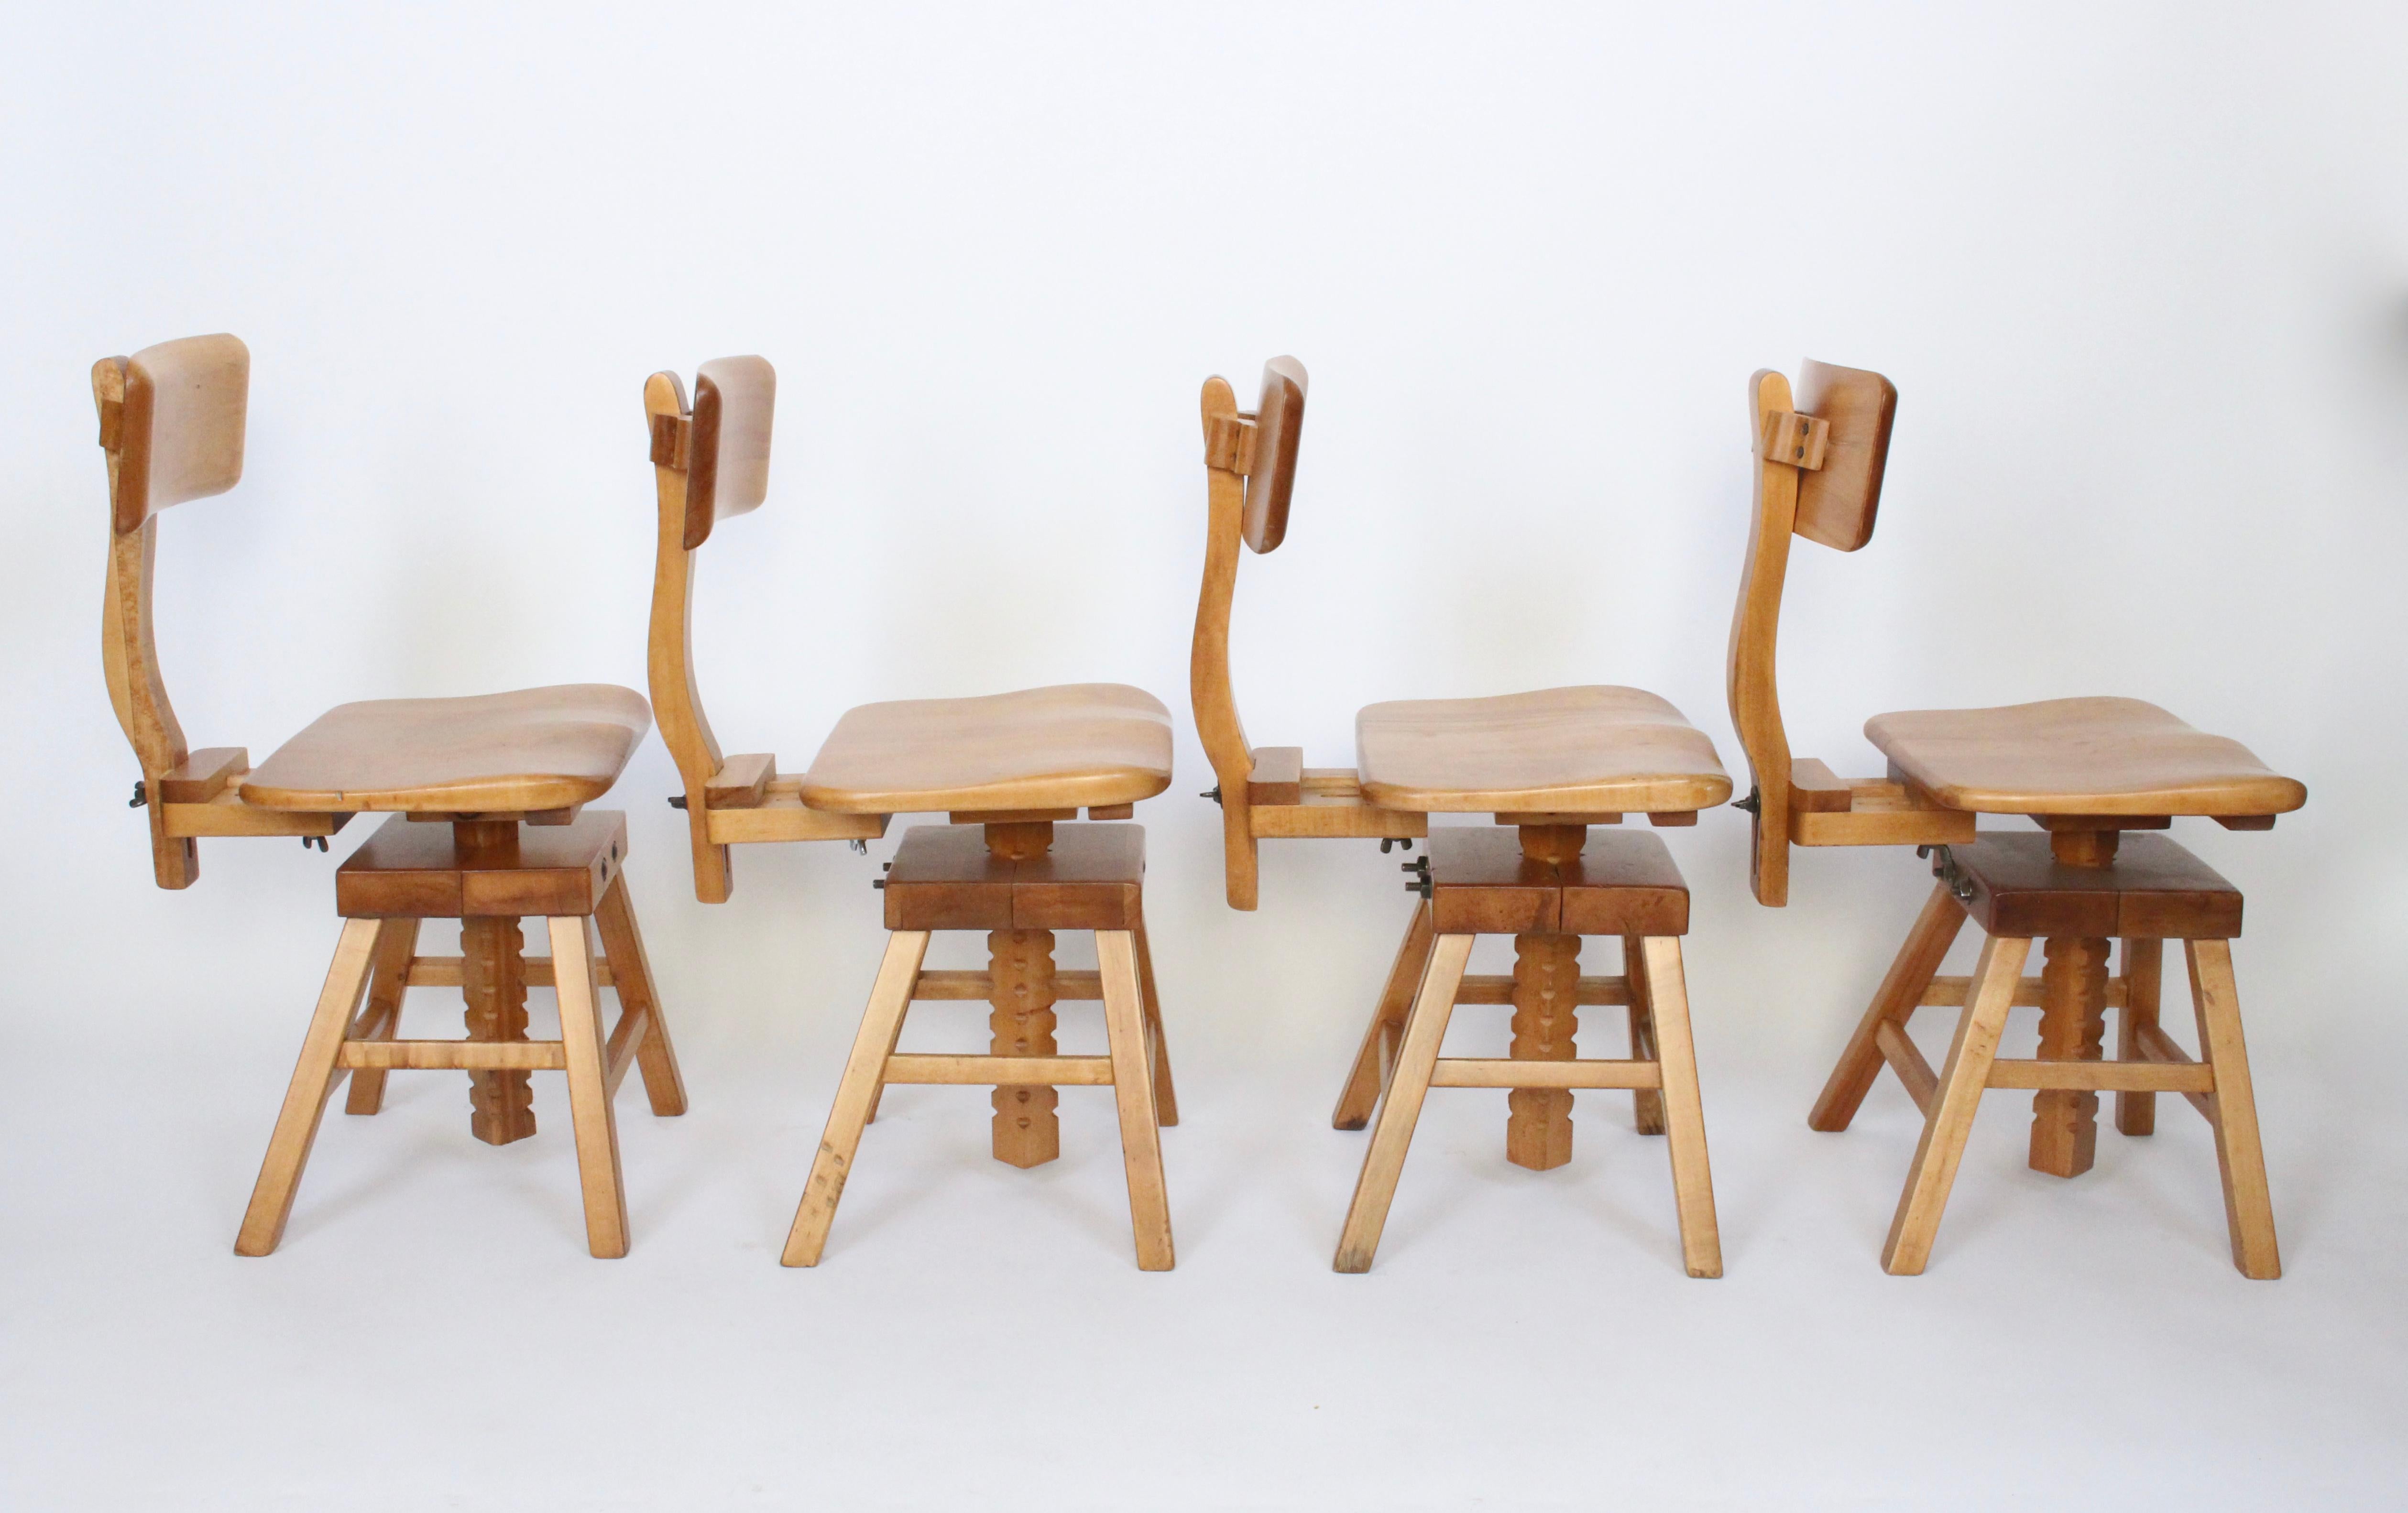 American Set of Four Edward L. Koenig Adjustable Architects Chairs in Maple, circa 1940